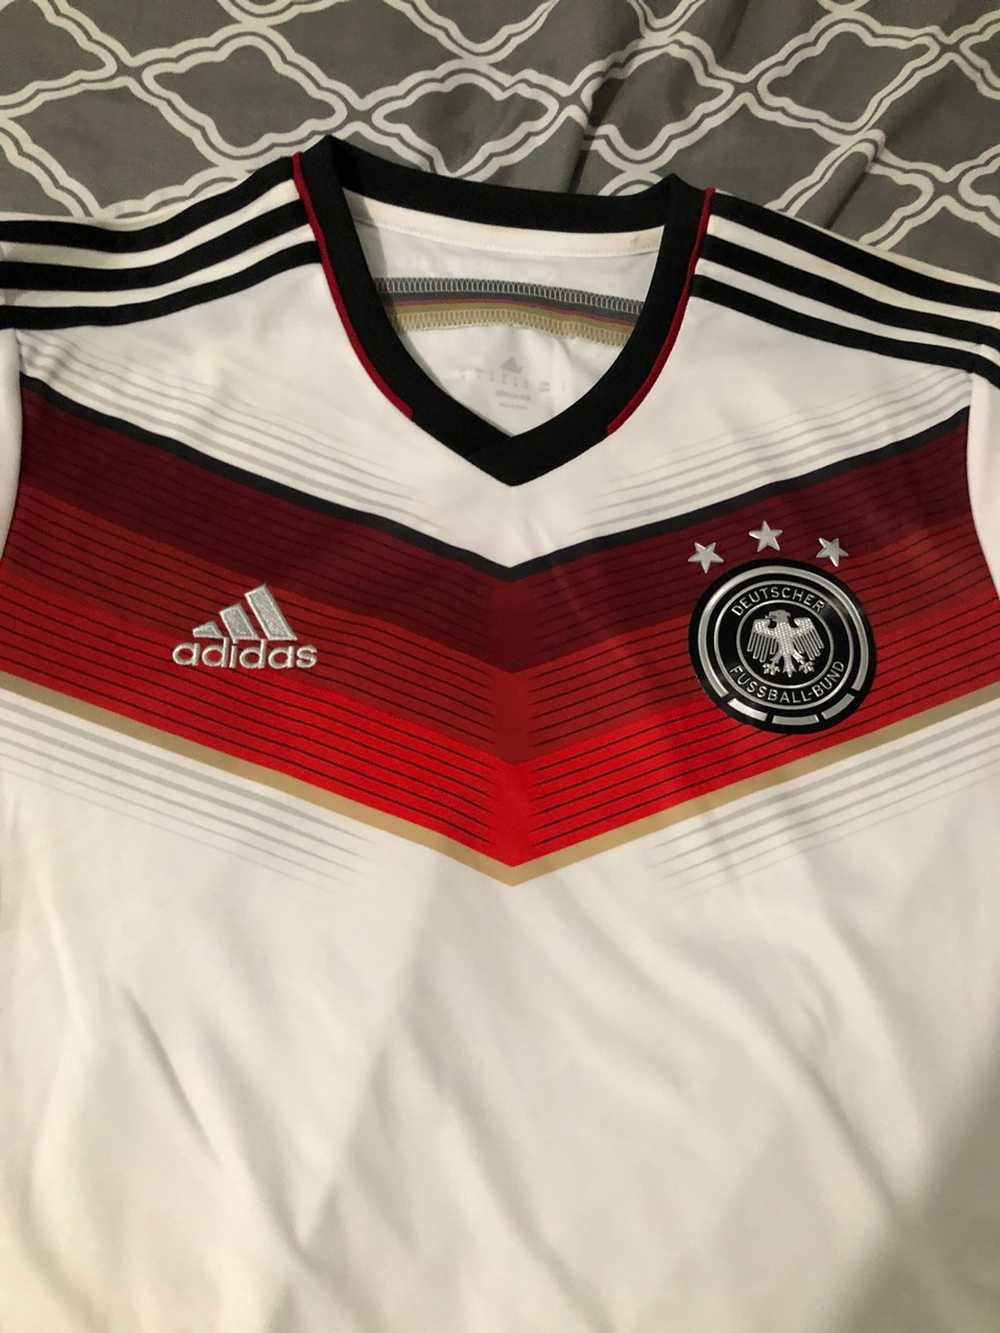 Adidas × Soccer Jersey Germany Adidas Soccer Jers… - image 3